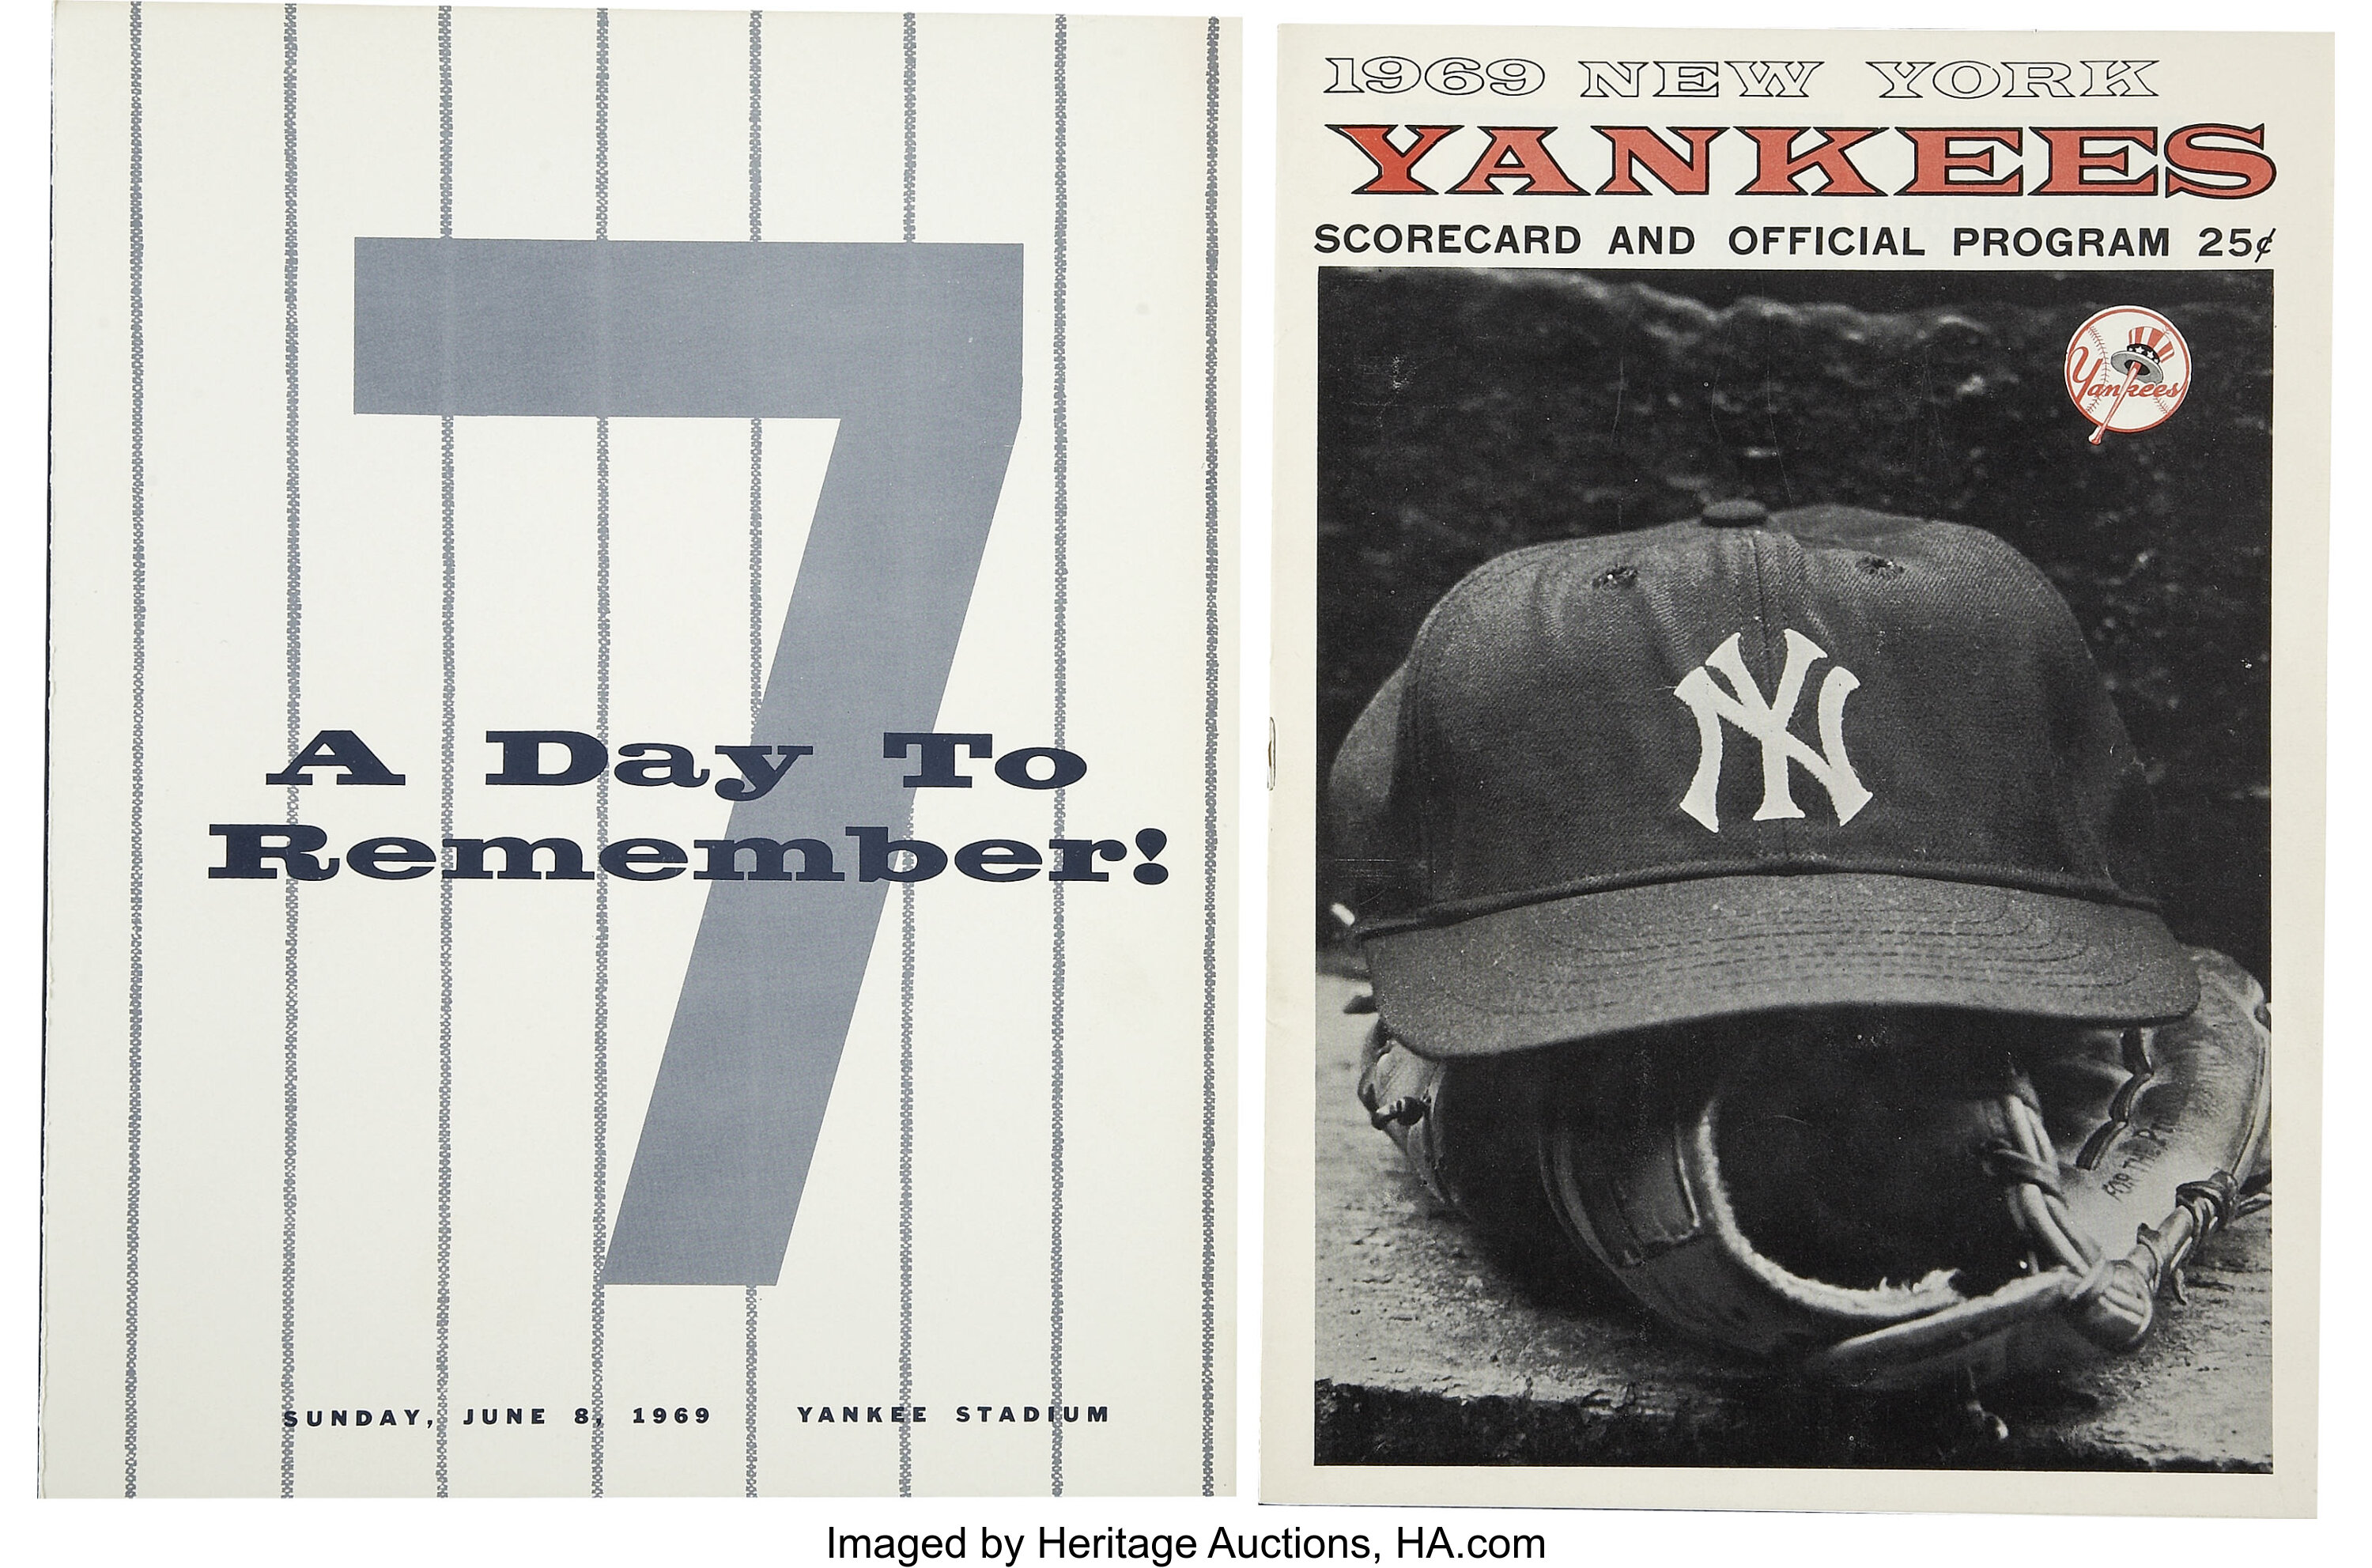 On this day in history, June 8, 1969, Mickey Mantle's No. 7 is